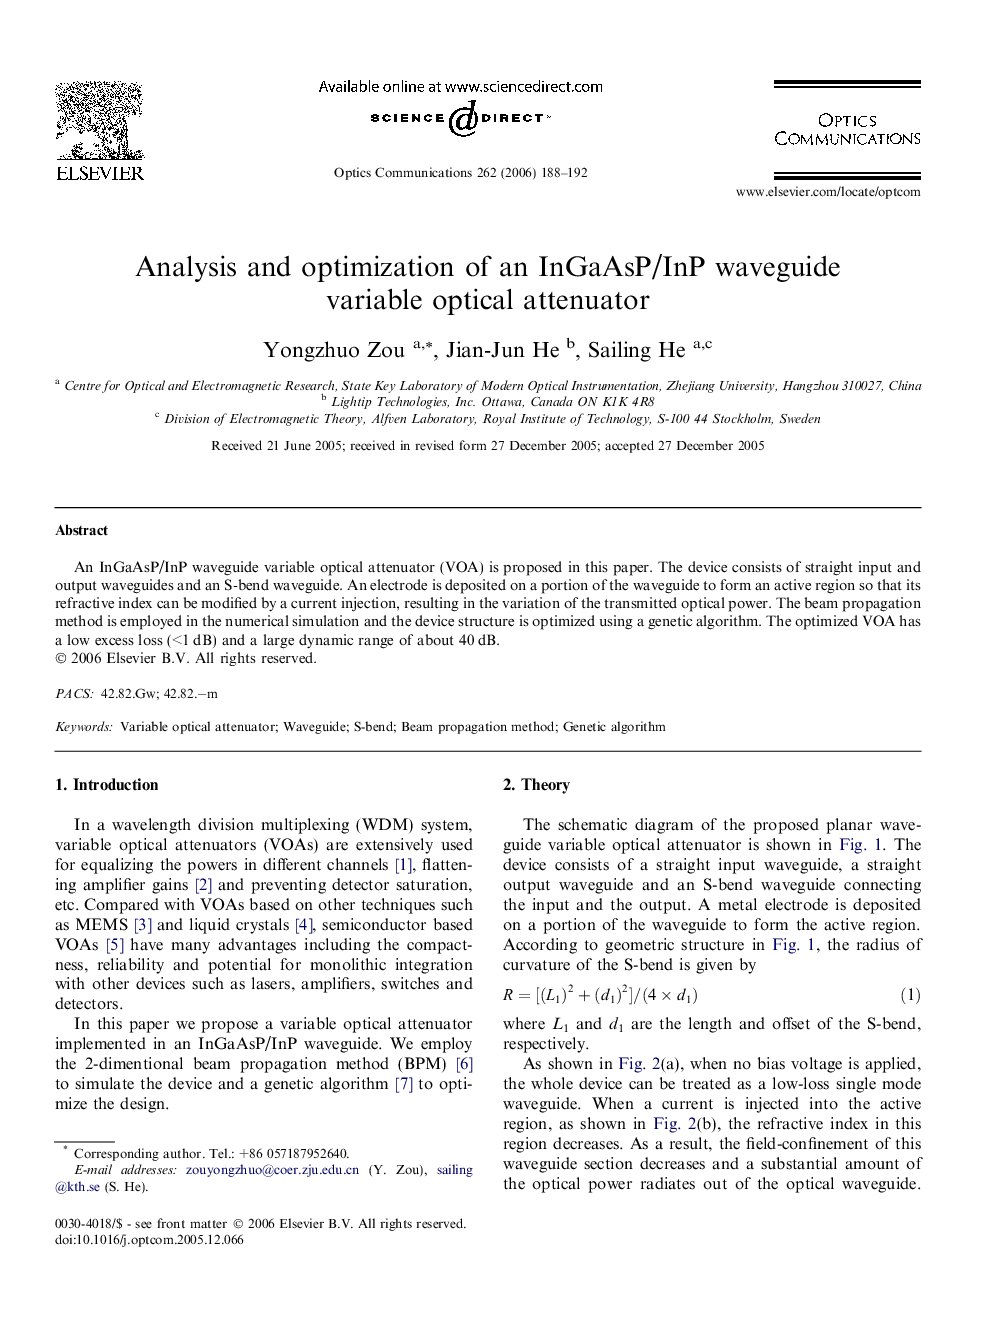 Analysis and optimization of an InGaAsP/InP waveguide variable optical attenuator